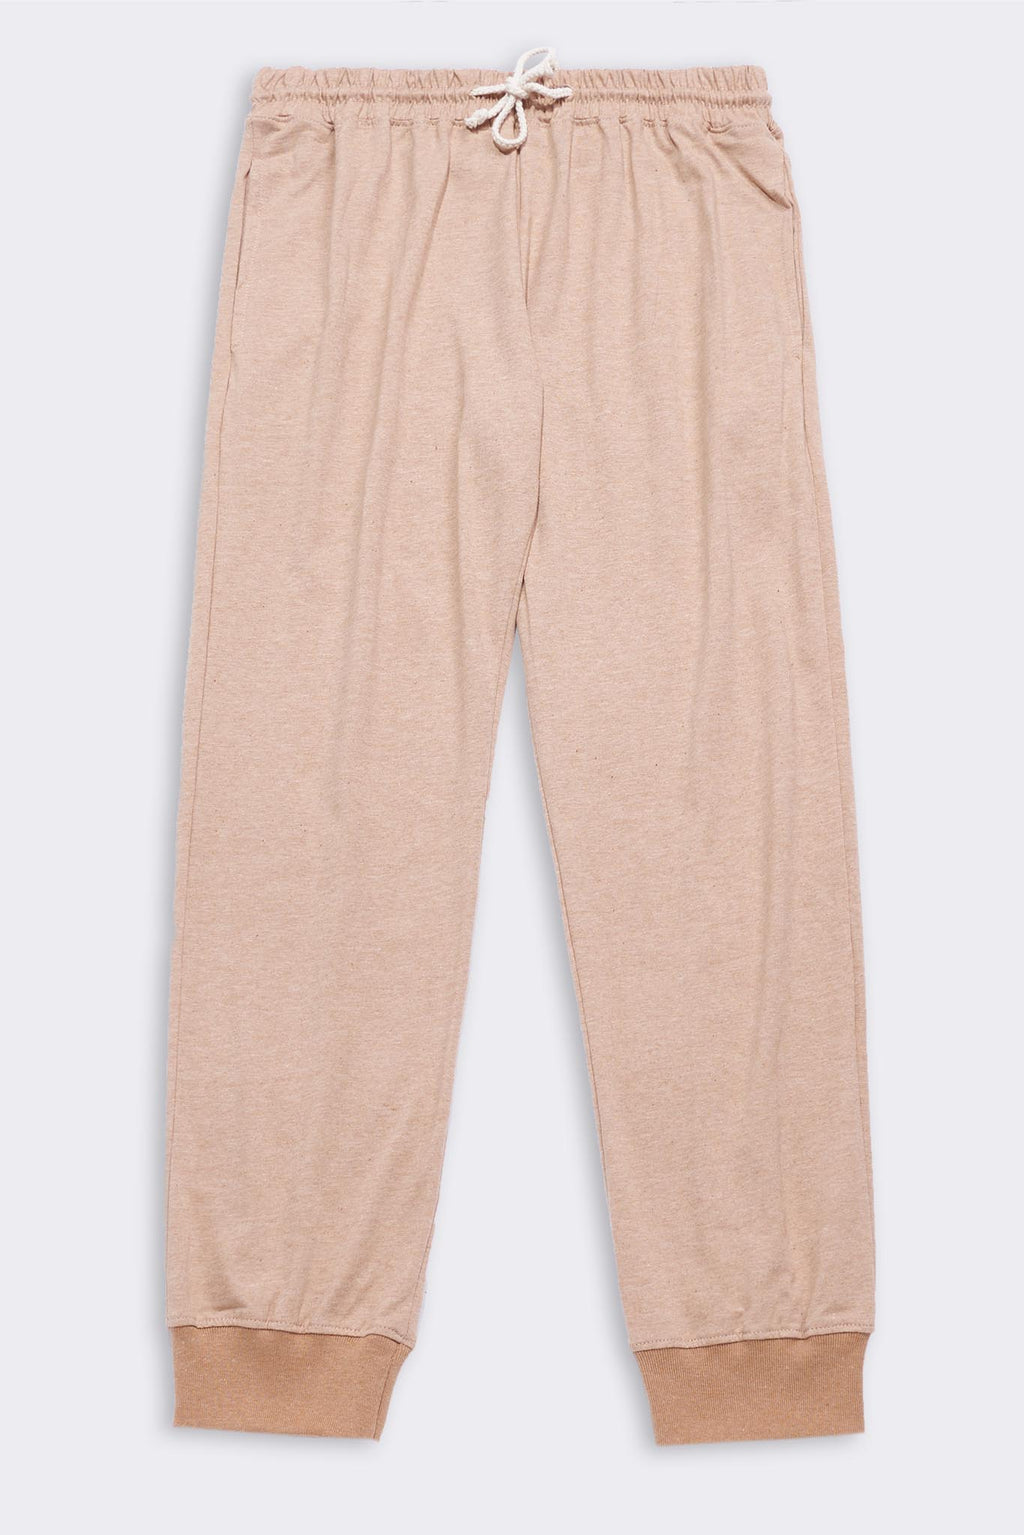 Cotton casual beige joggers